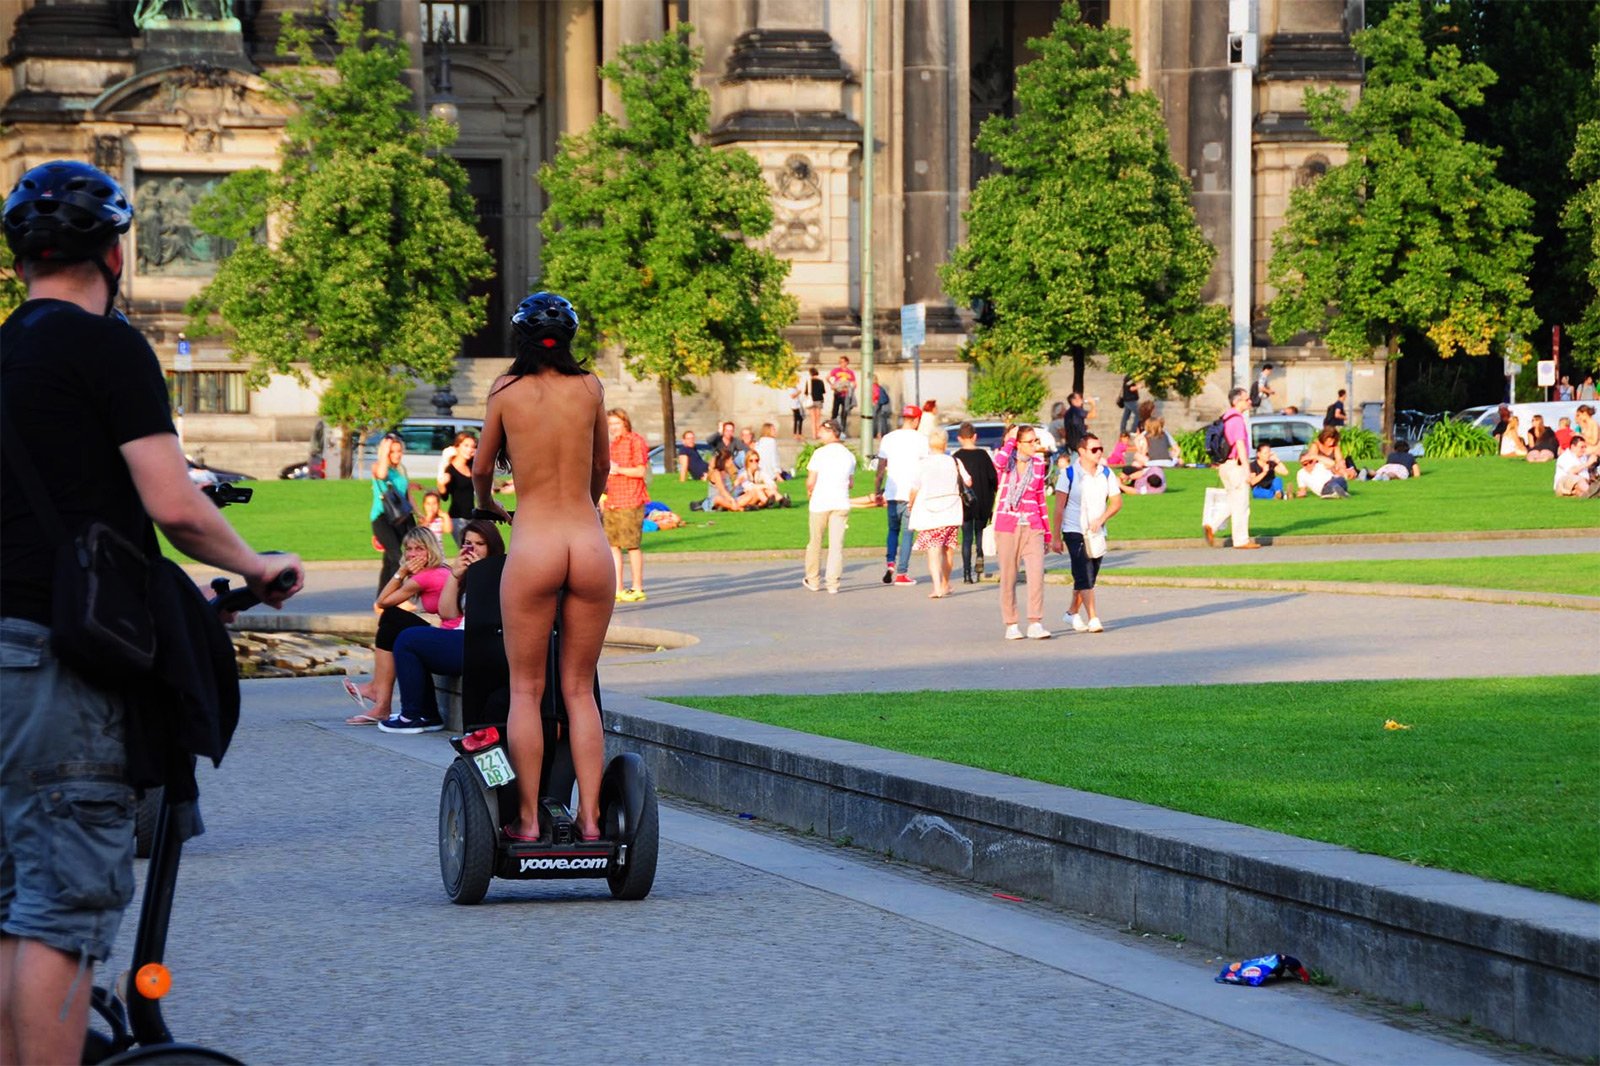 How to ride naked on segway on Potsdamer Platz in Berlin